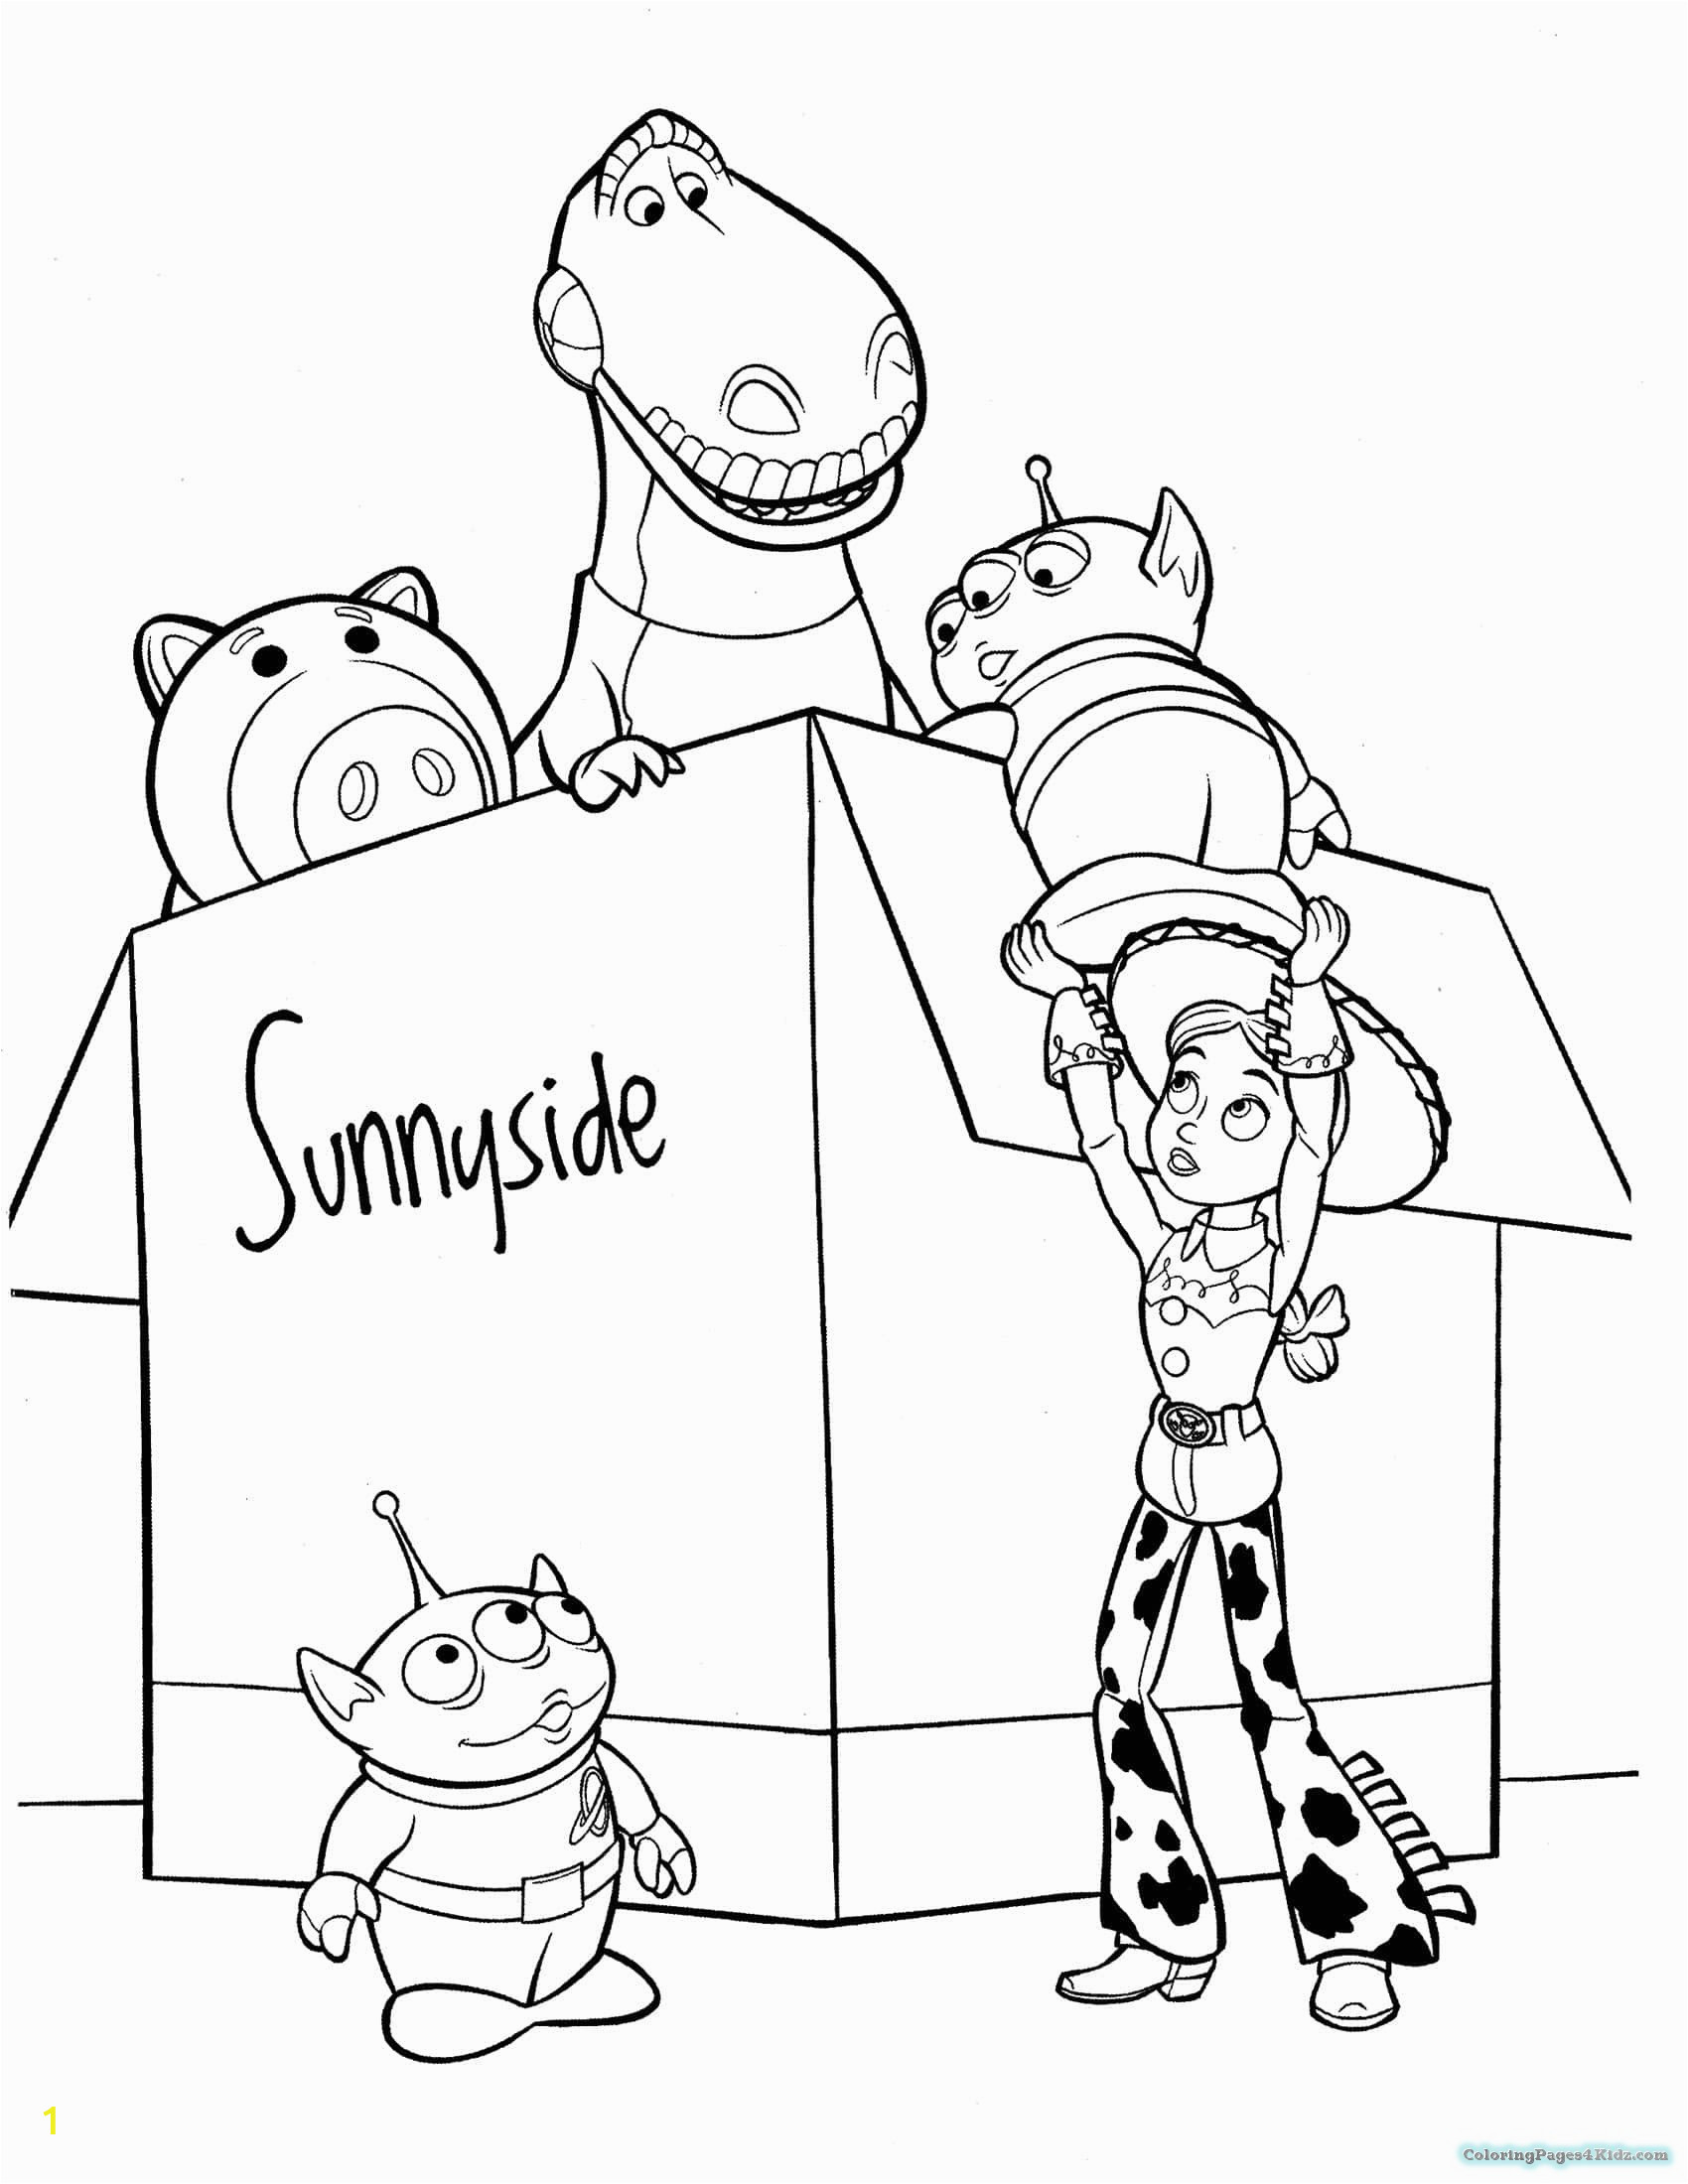 Disney toy Story 3 Coloring Pages Disney toy Story 3 Coloring Pages